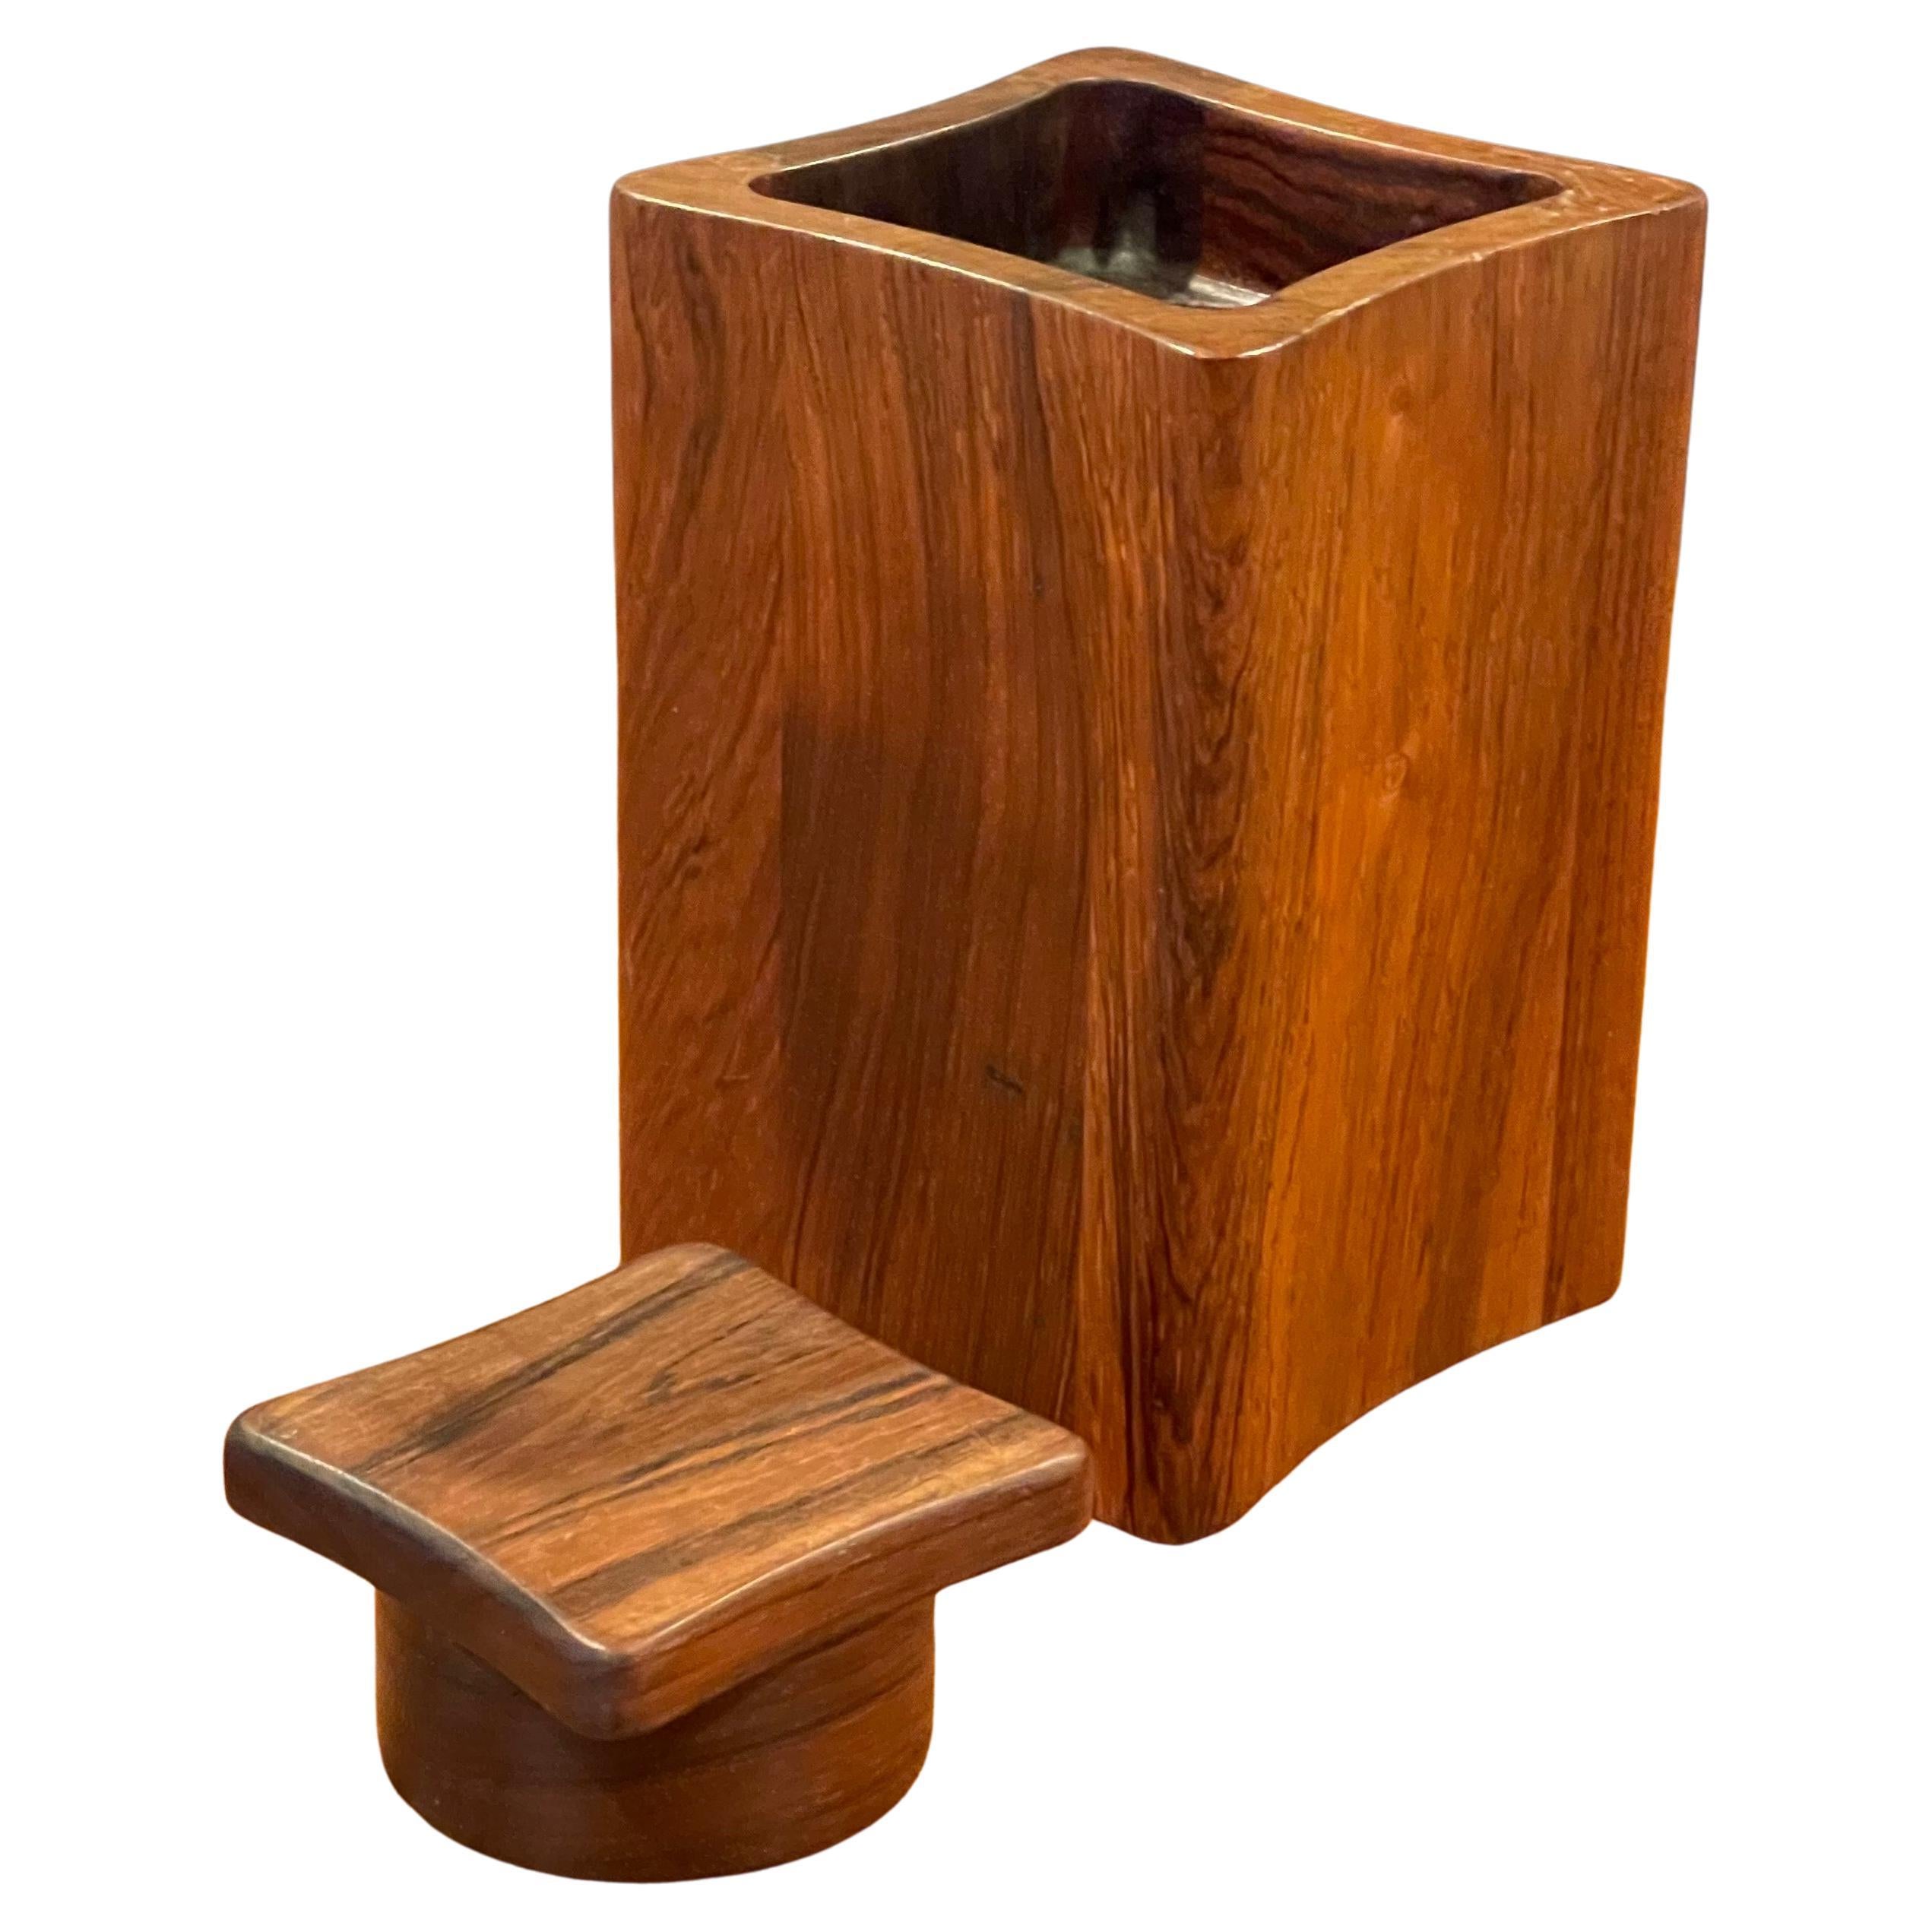 A very hard-to-find concave square lidded container, box or humidor designed by Jens Quistgaard for Dansk, circa 1960s. The box is made of palisander or rosewood (same family of wood) that was part of Quistgaard’s special “Rare Wood Collection” for